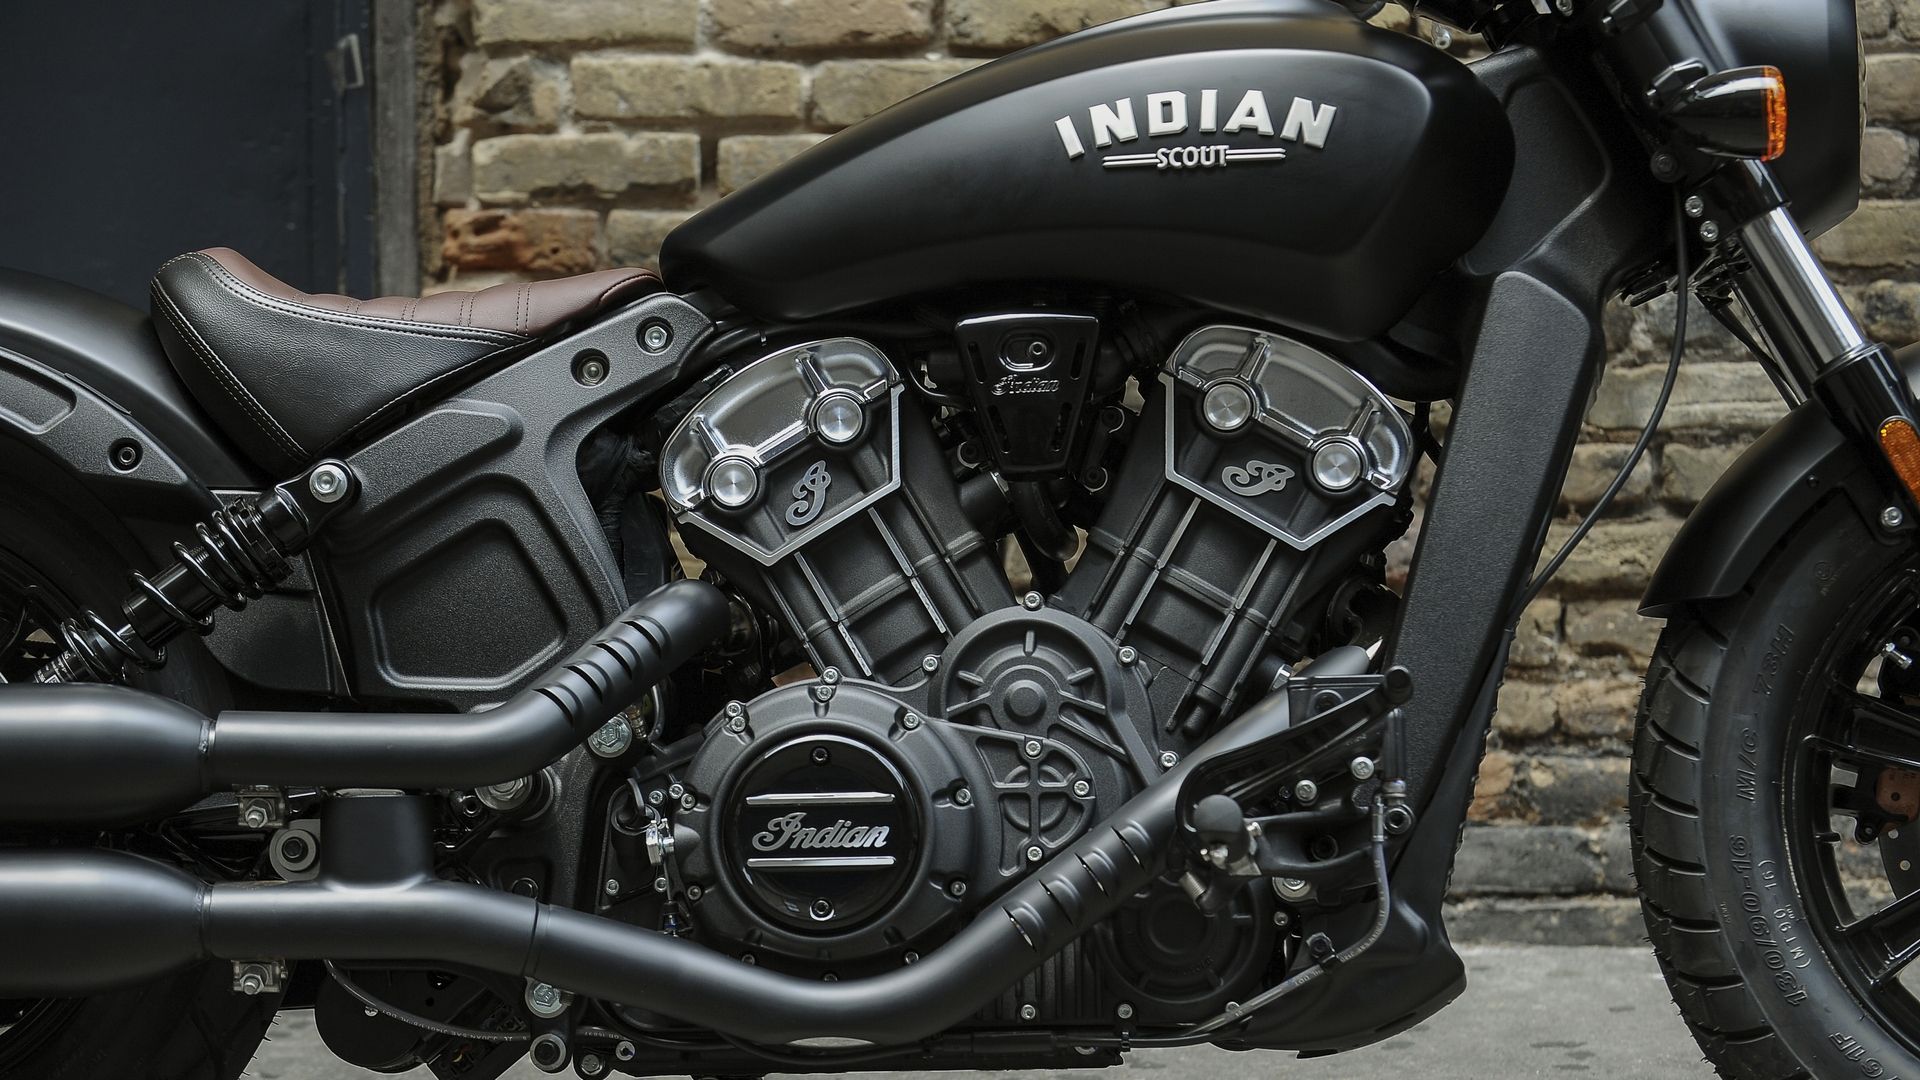 Indian Motorcycles unveils all new 2018 Scout Bobber